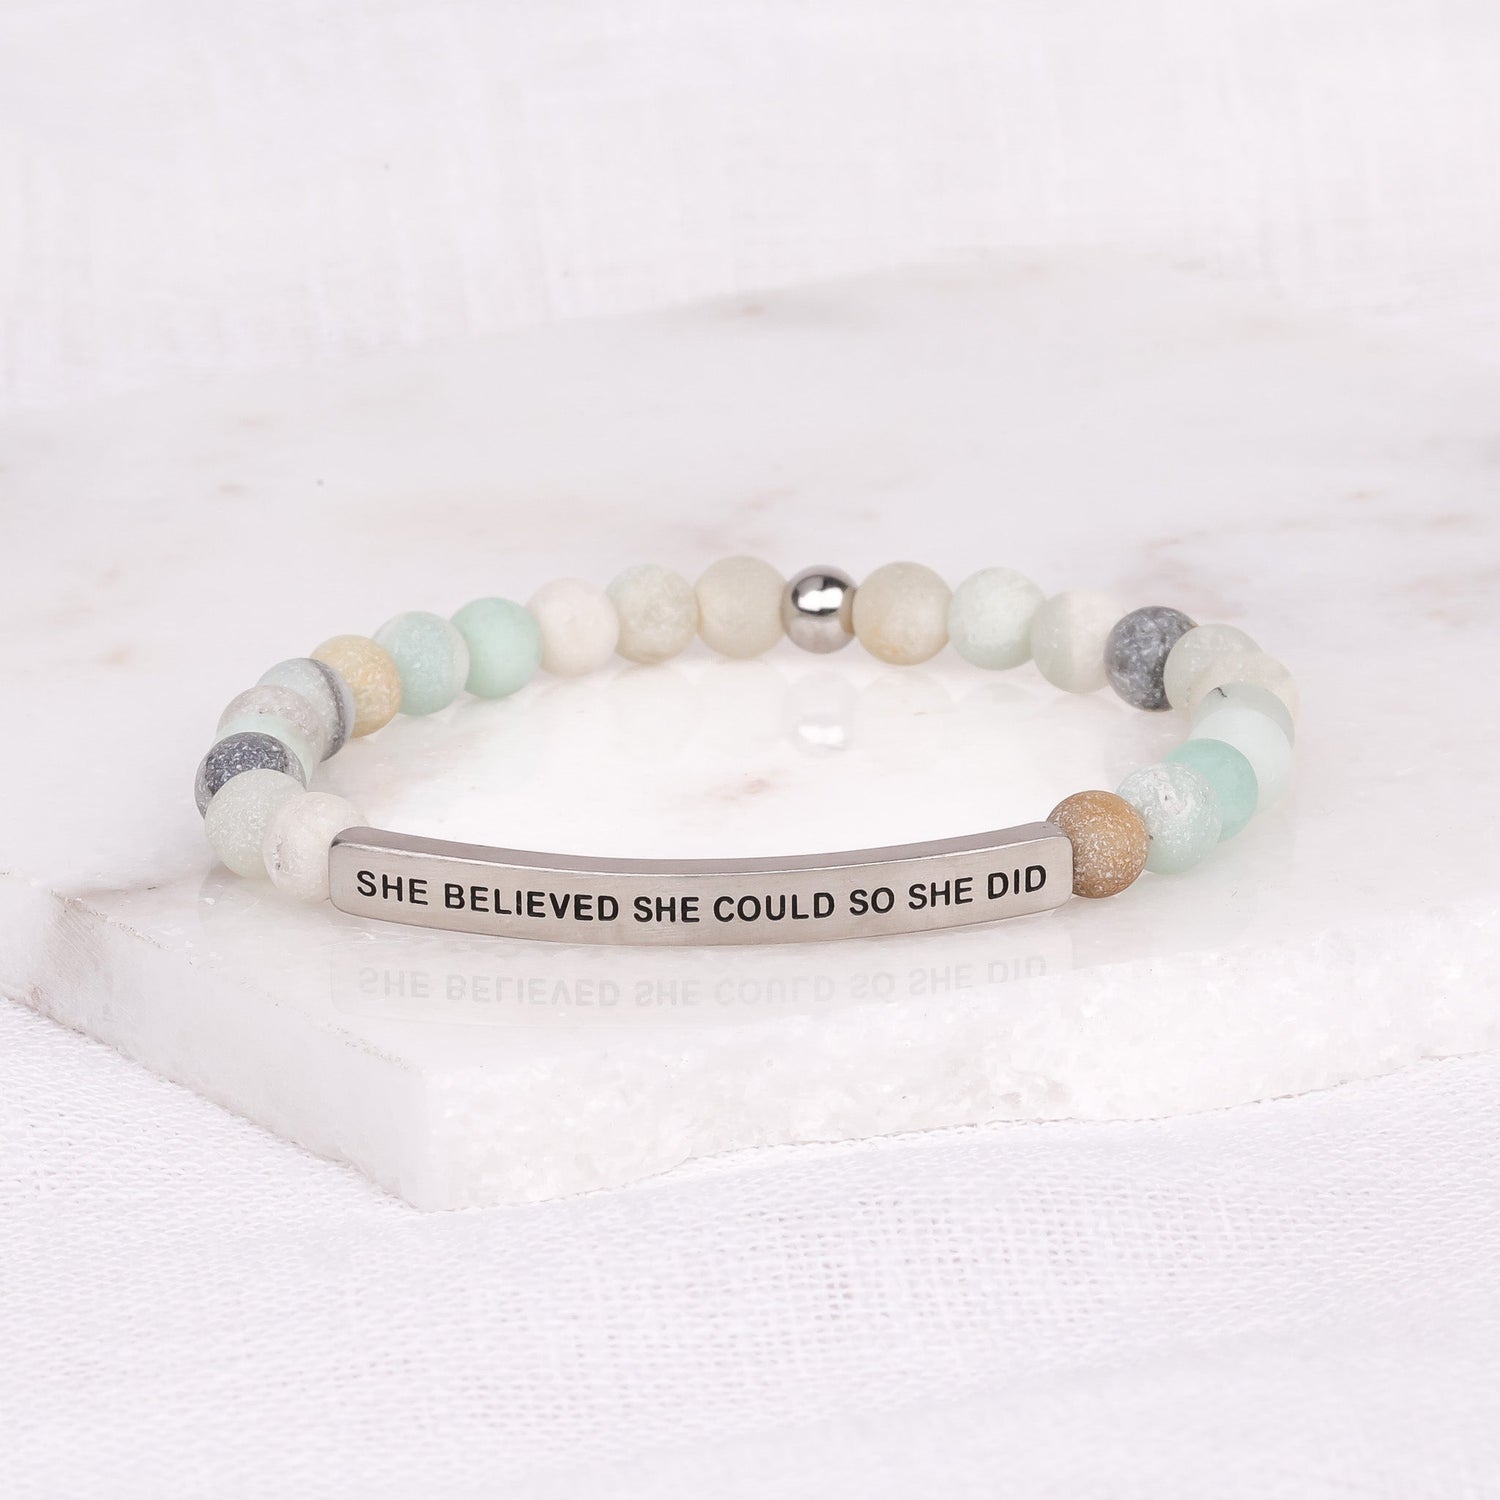 SHE BELIEVED SHE COULD SO SHE DID - Kids Collection - Inspiration Co.